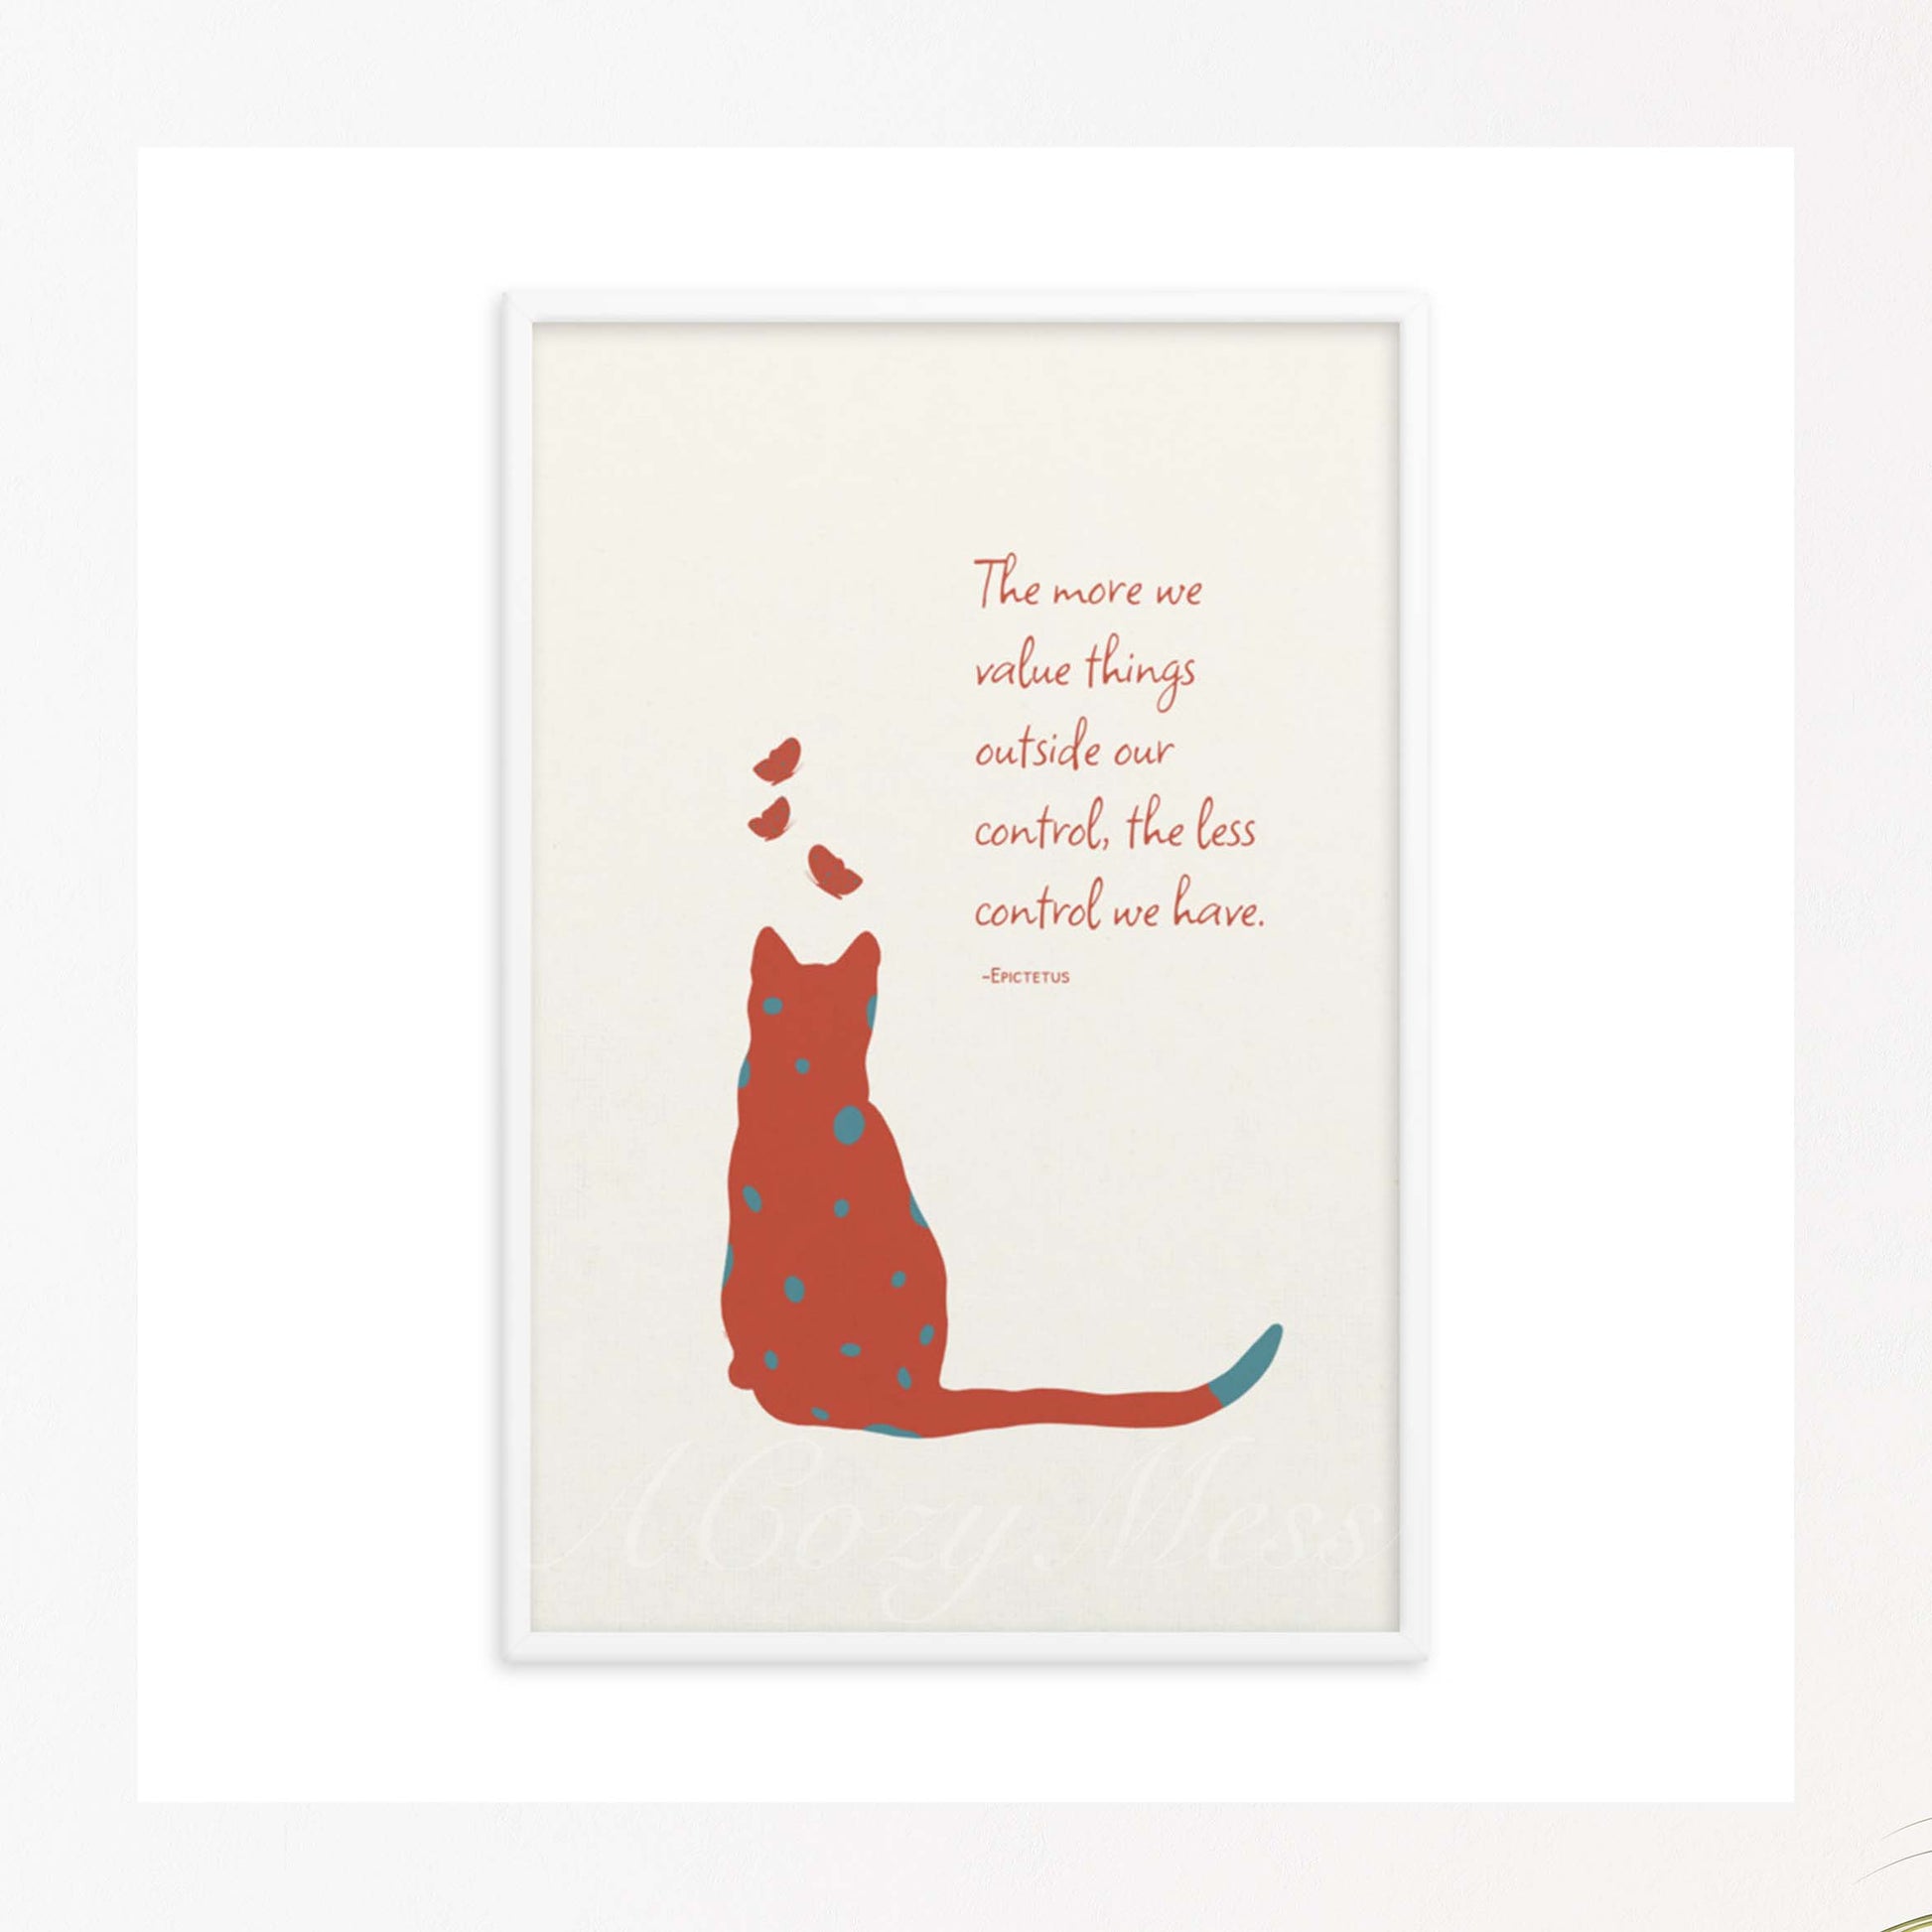 Epictetus Stoic Quote Poster, Epictetus Stoic Quote Poster, with a cat & butterflies illustration in red & blue on white background in white frame.